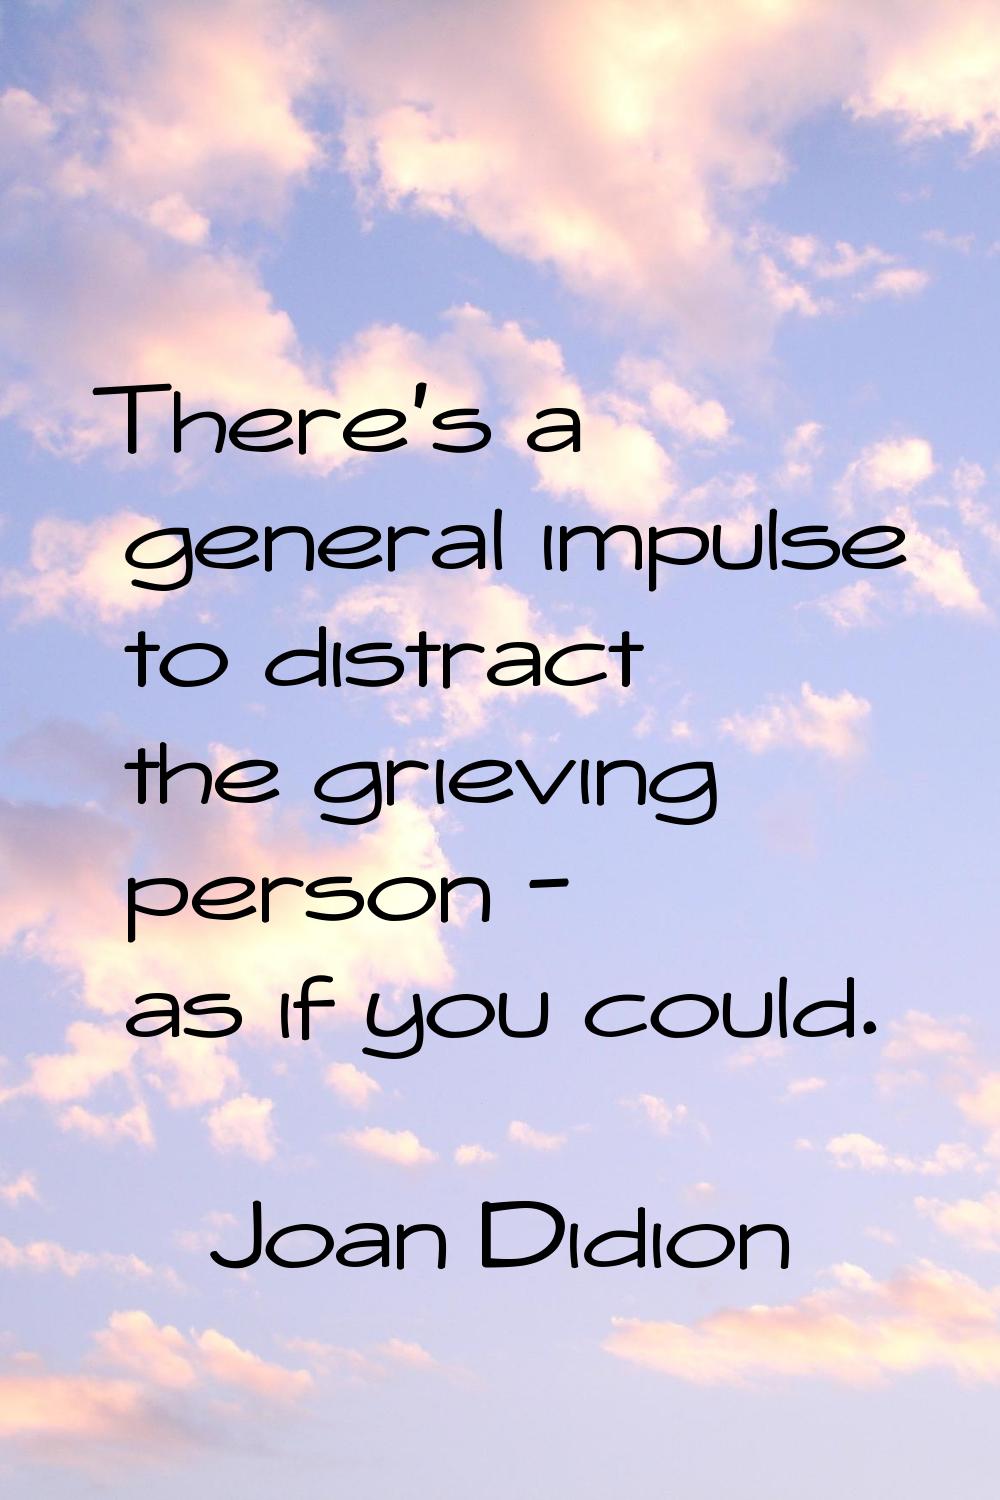 There's a general impulse to distract the grieving person - as if you could.